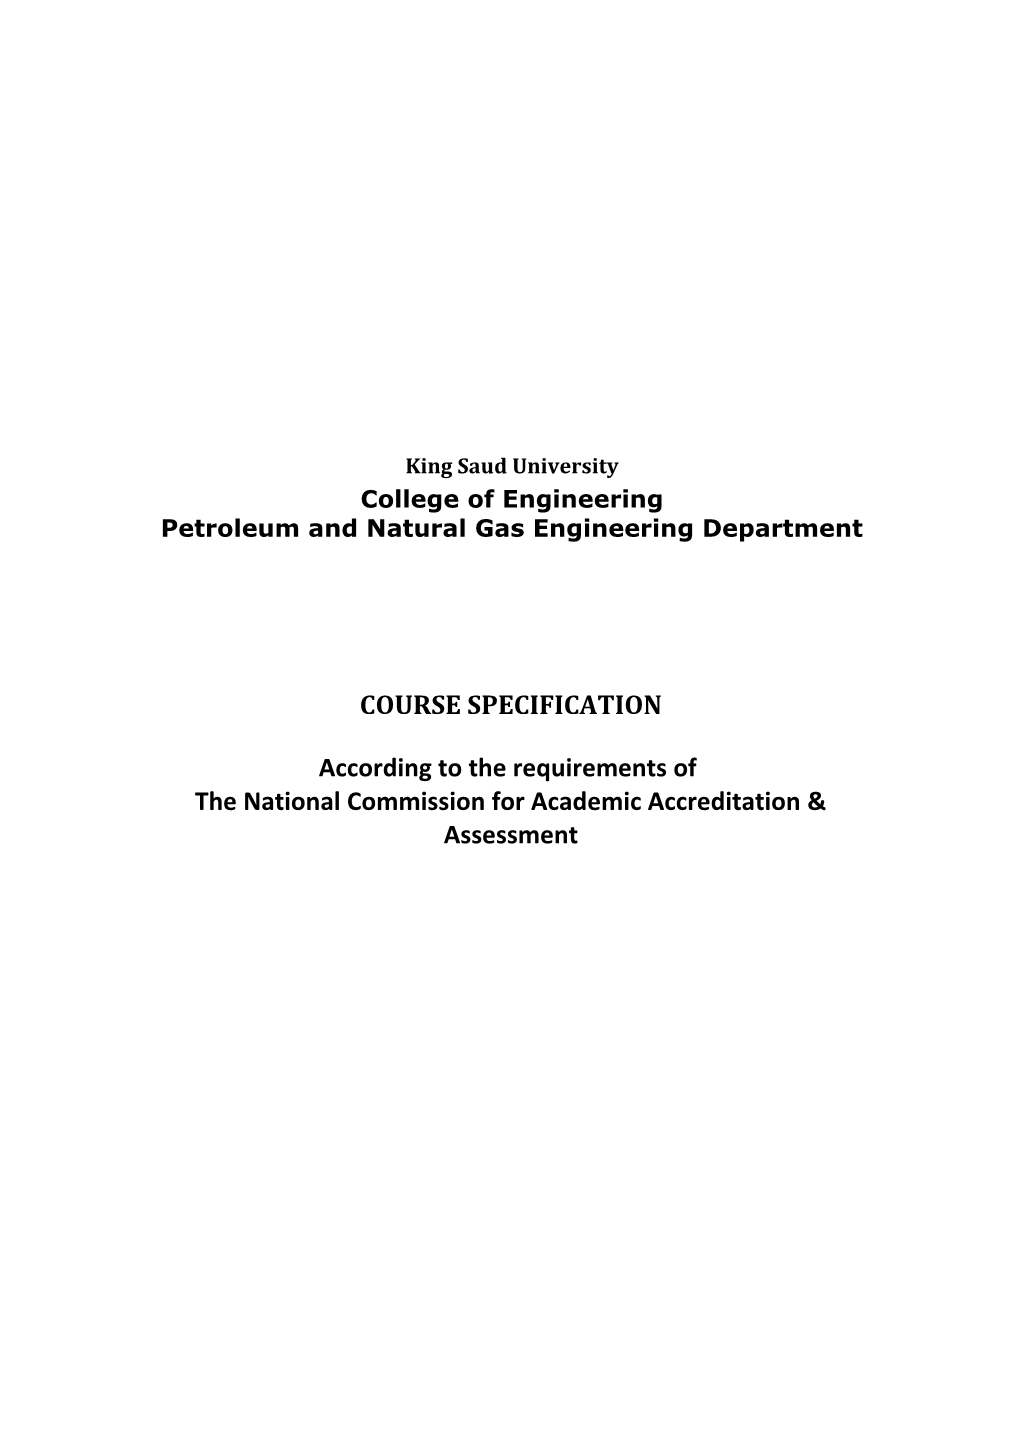 Petroleum and Natural Gas Engineering Department